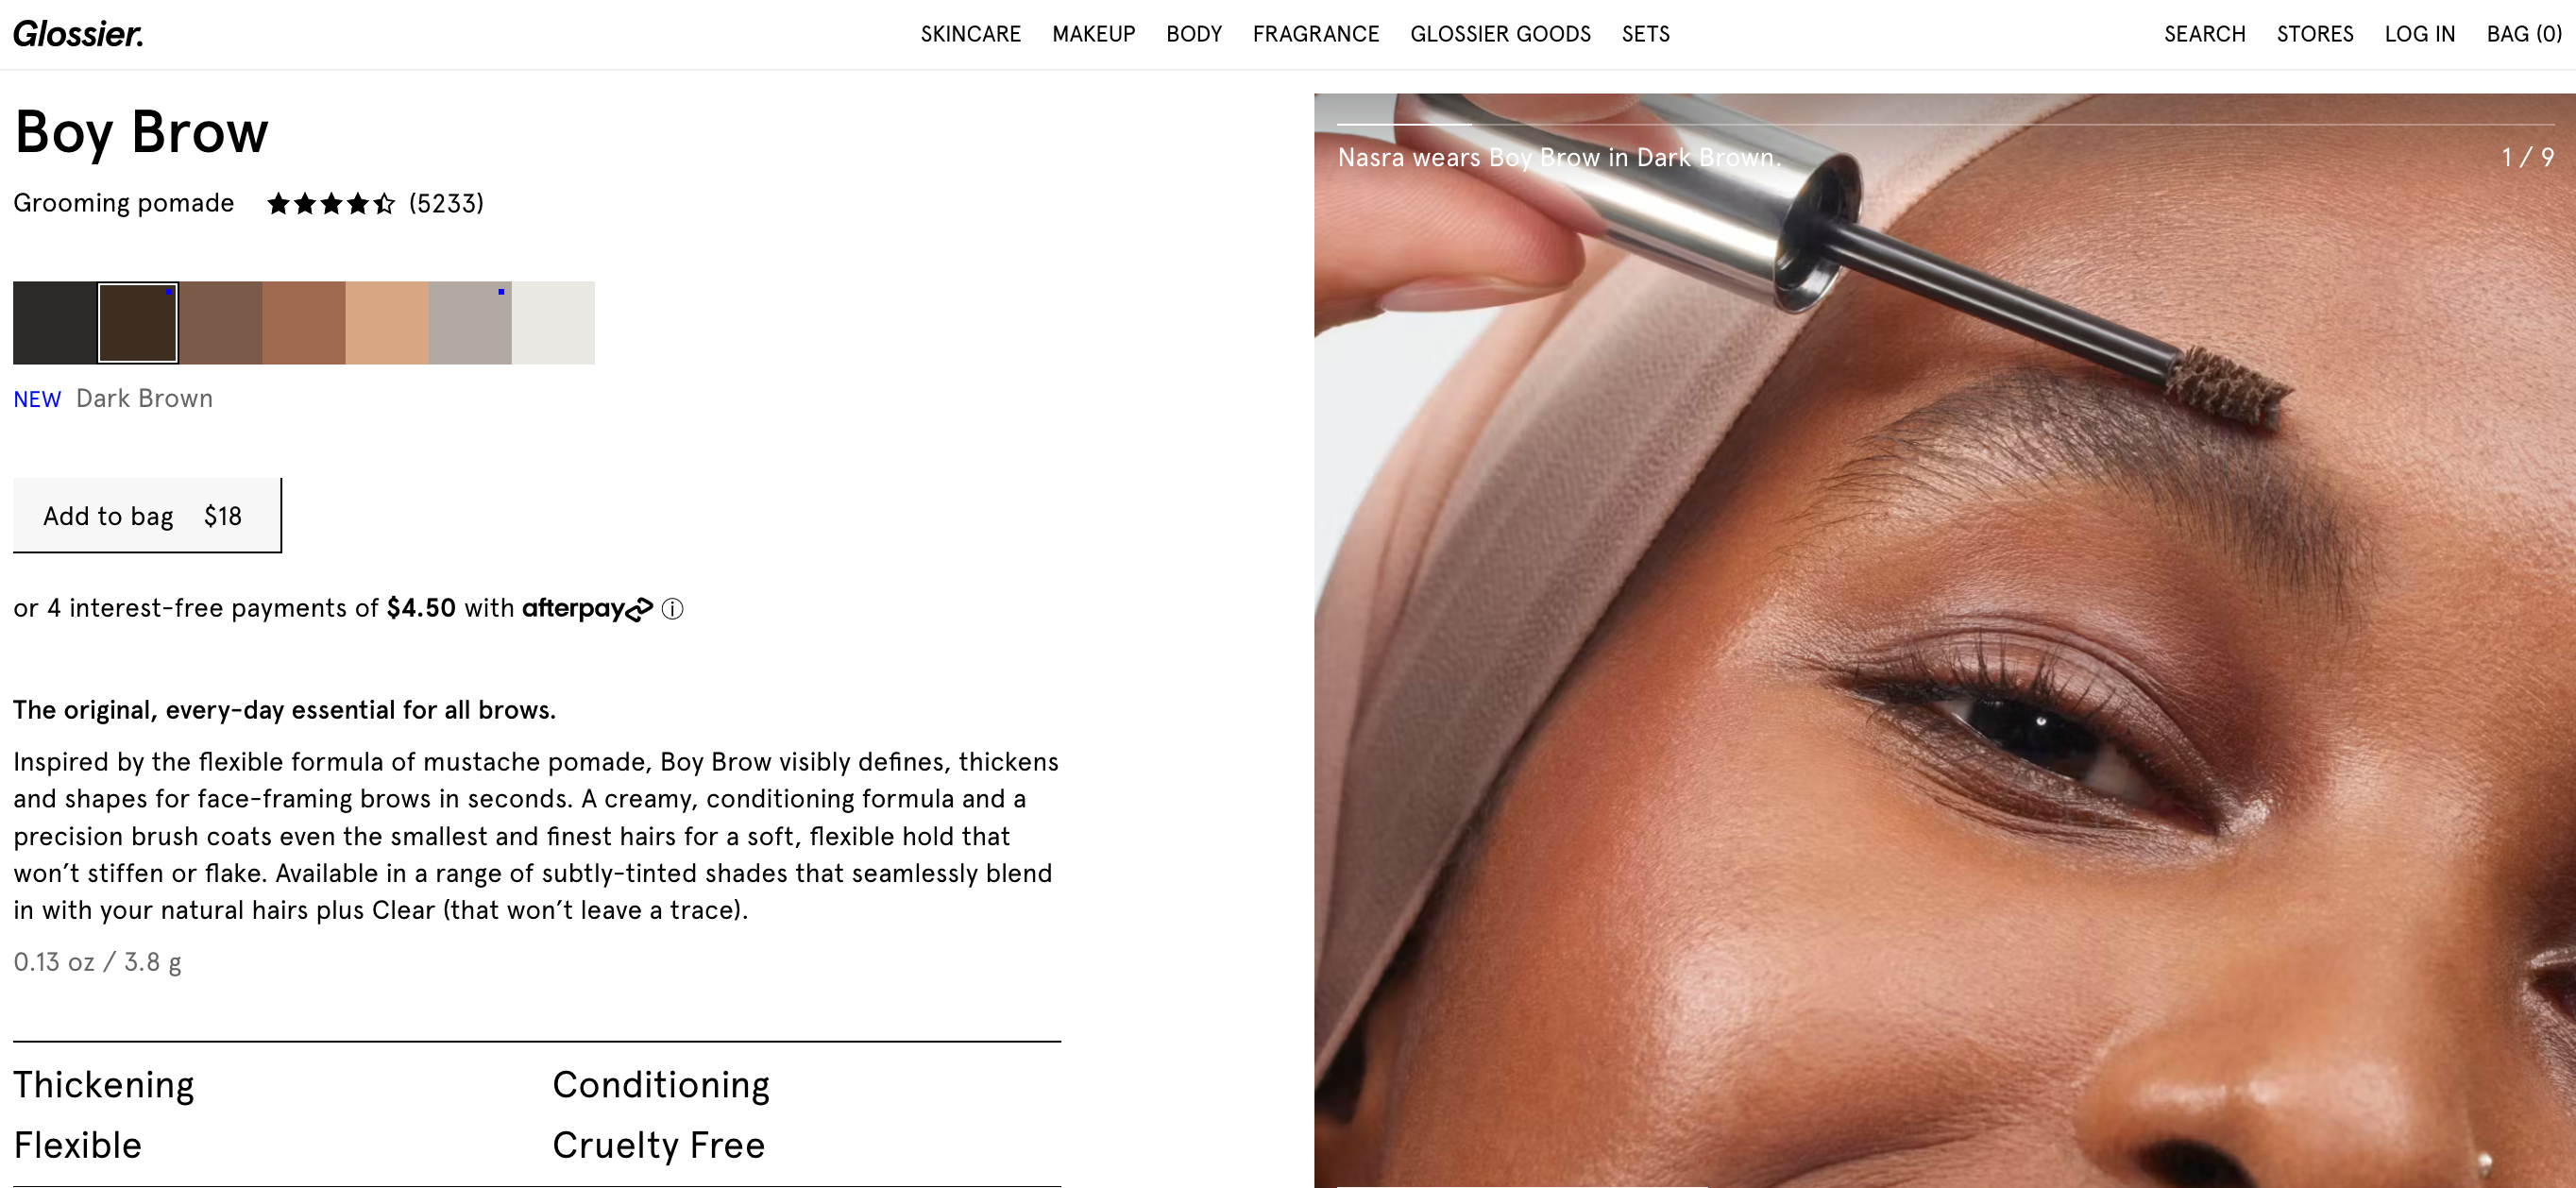 glossier product page from their website